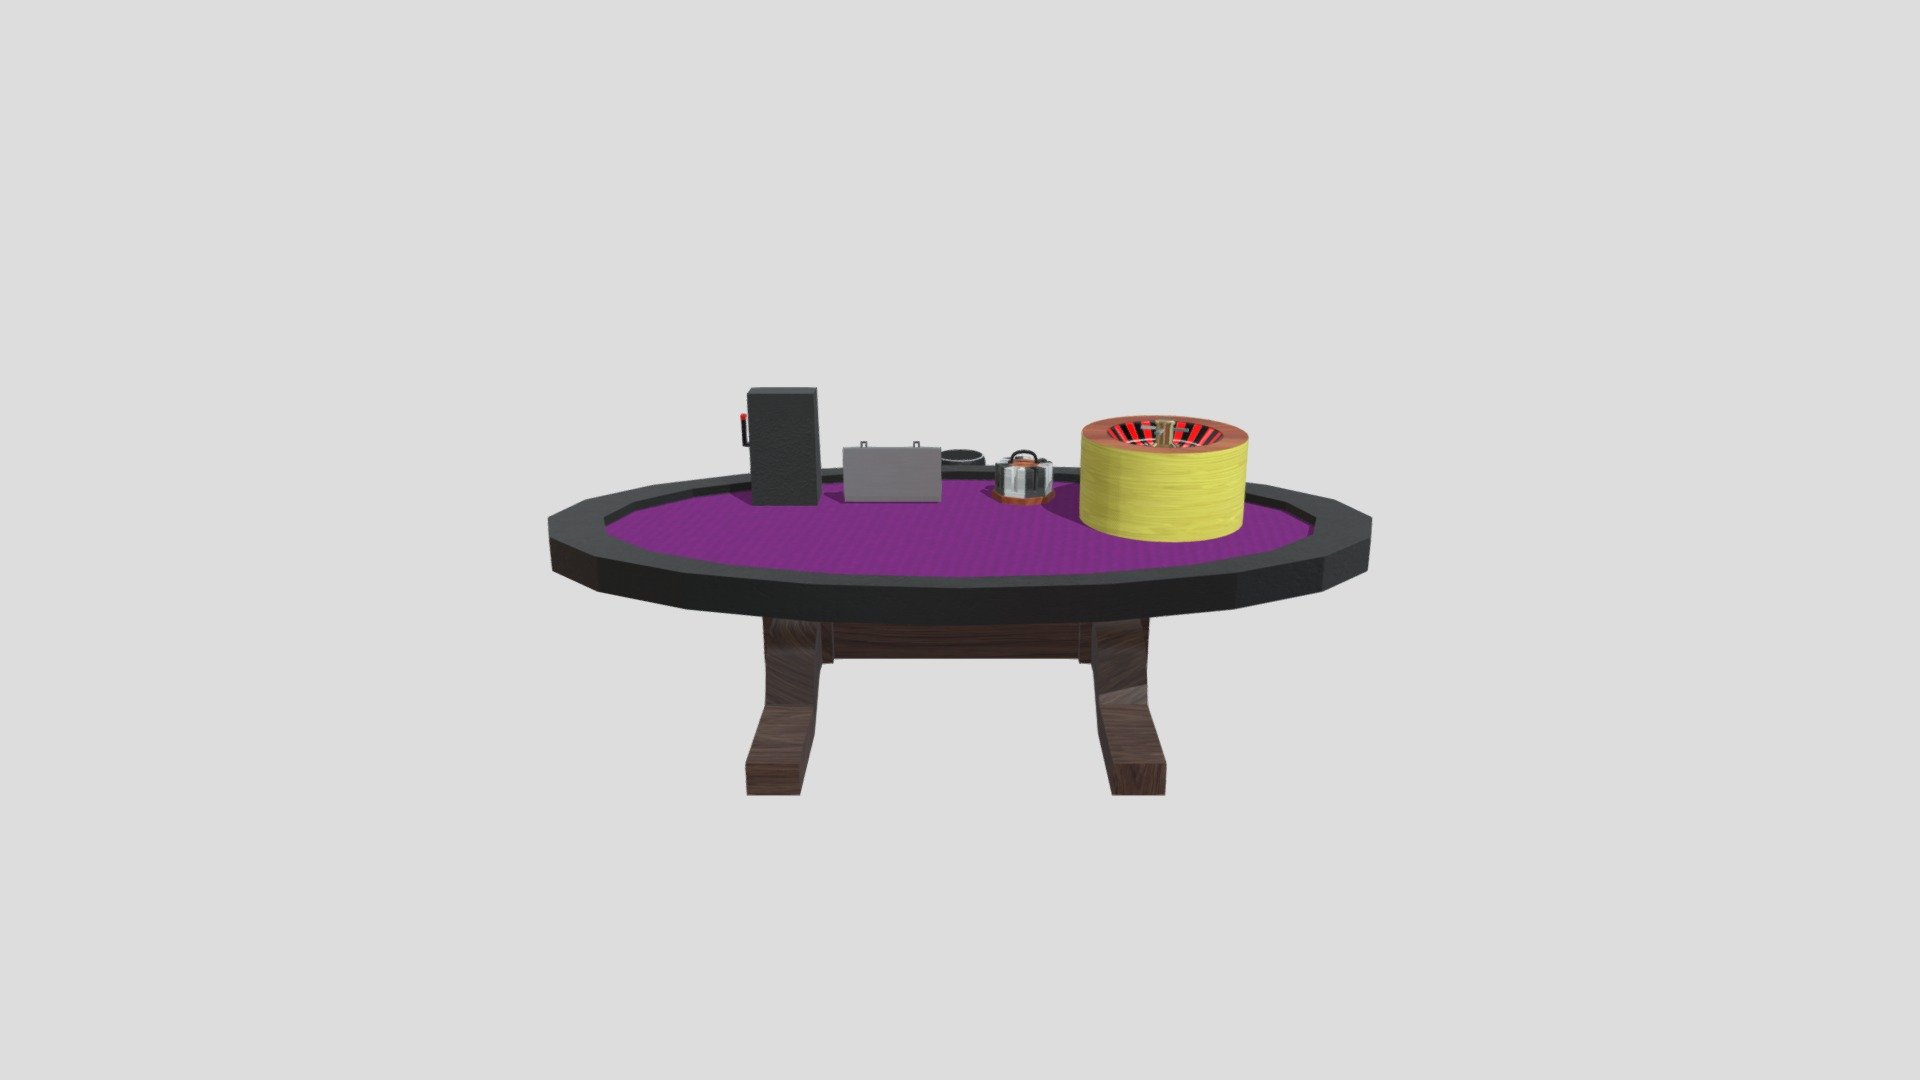 Six basic props that are casino themed. There is a poker table, a roulette board, a rotating chip holder, a chip case, a toy slot machine, and a sliding stool - Spicer_CasinoProps - Download Free 3D model by dsspicer 3d model